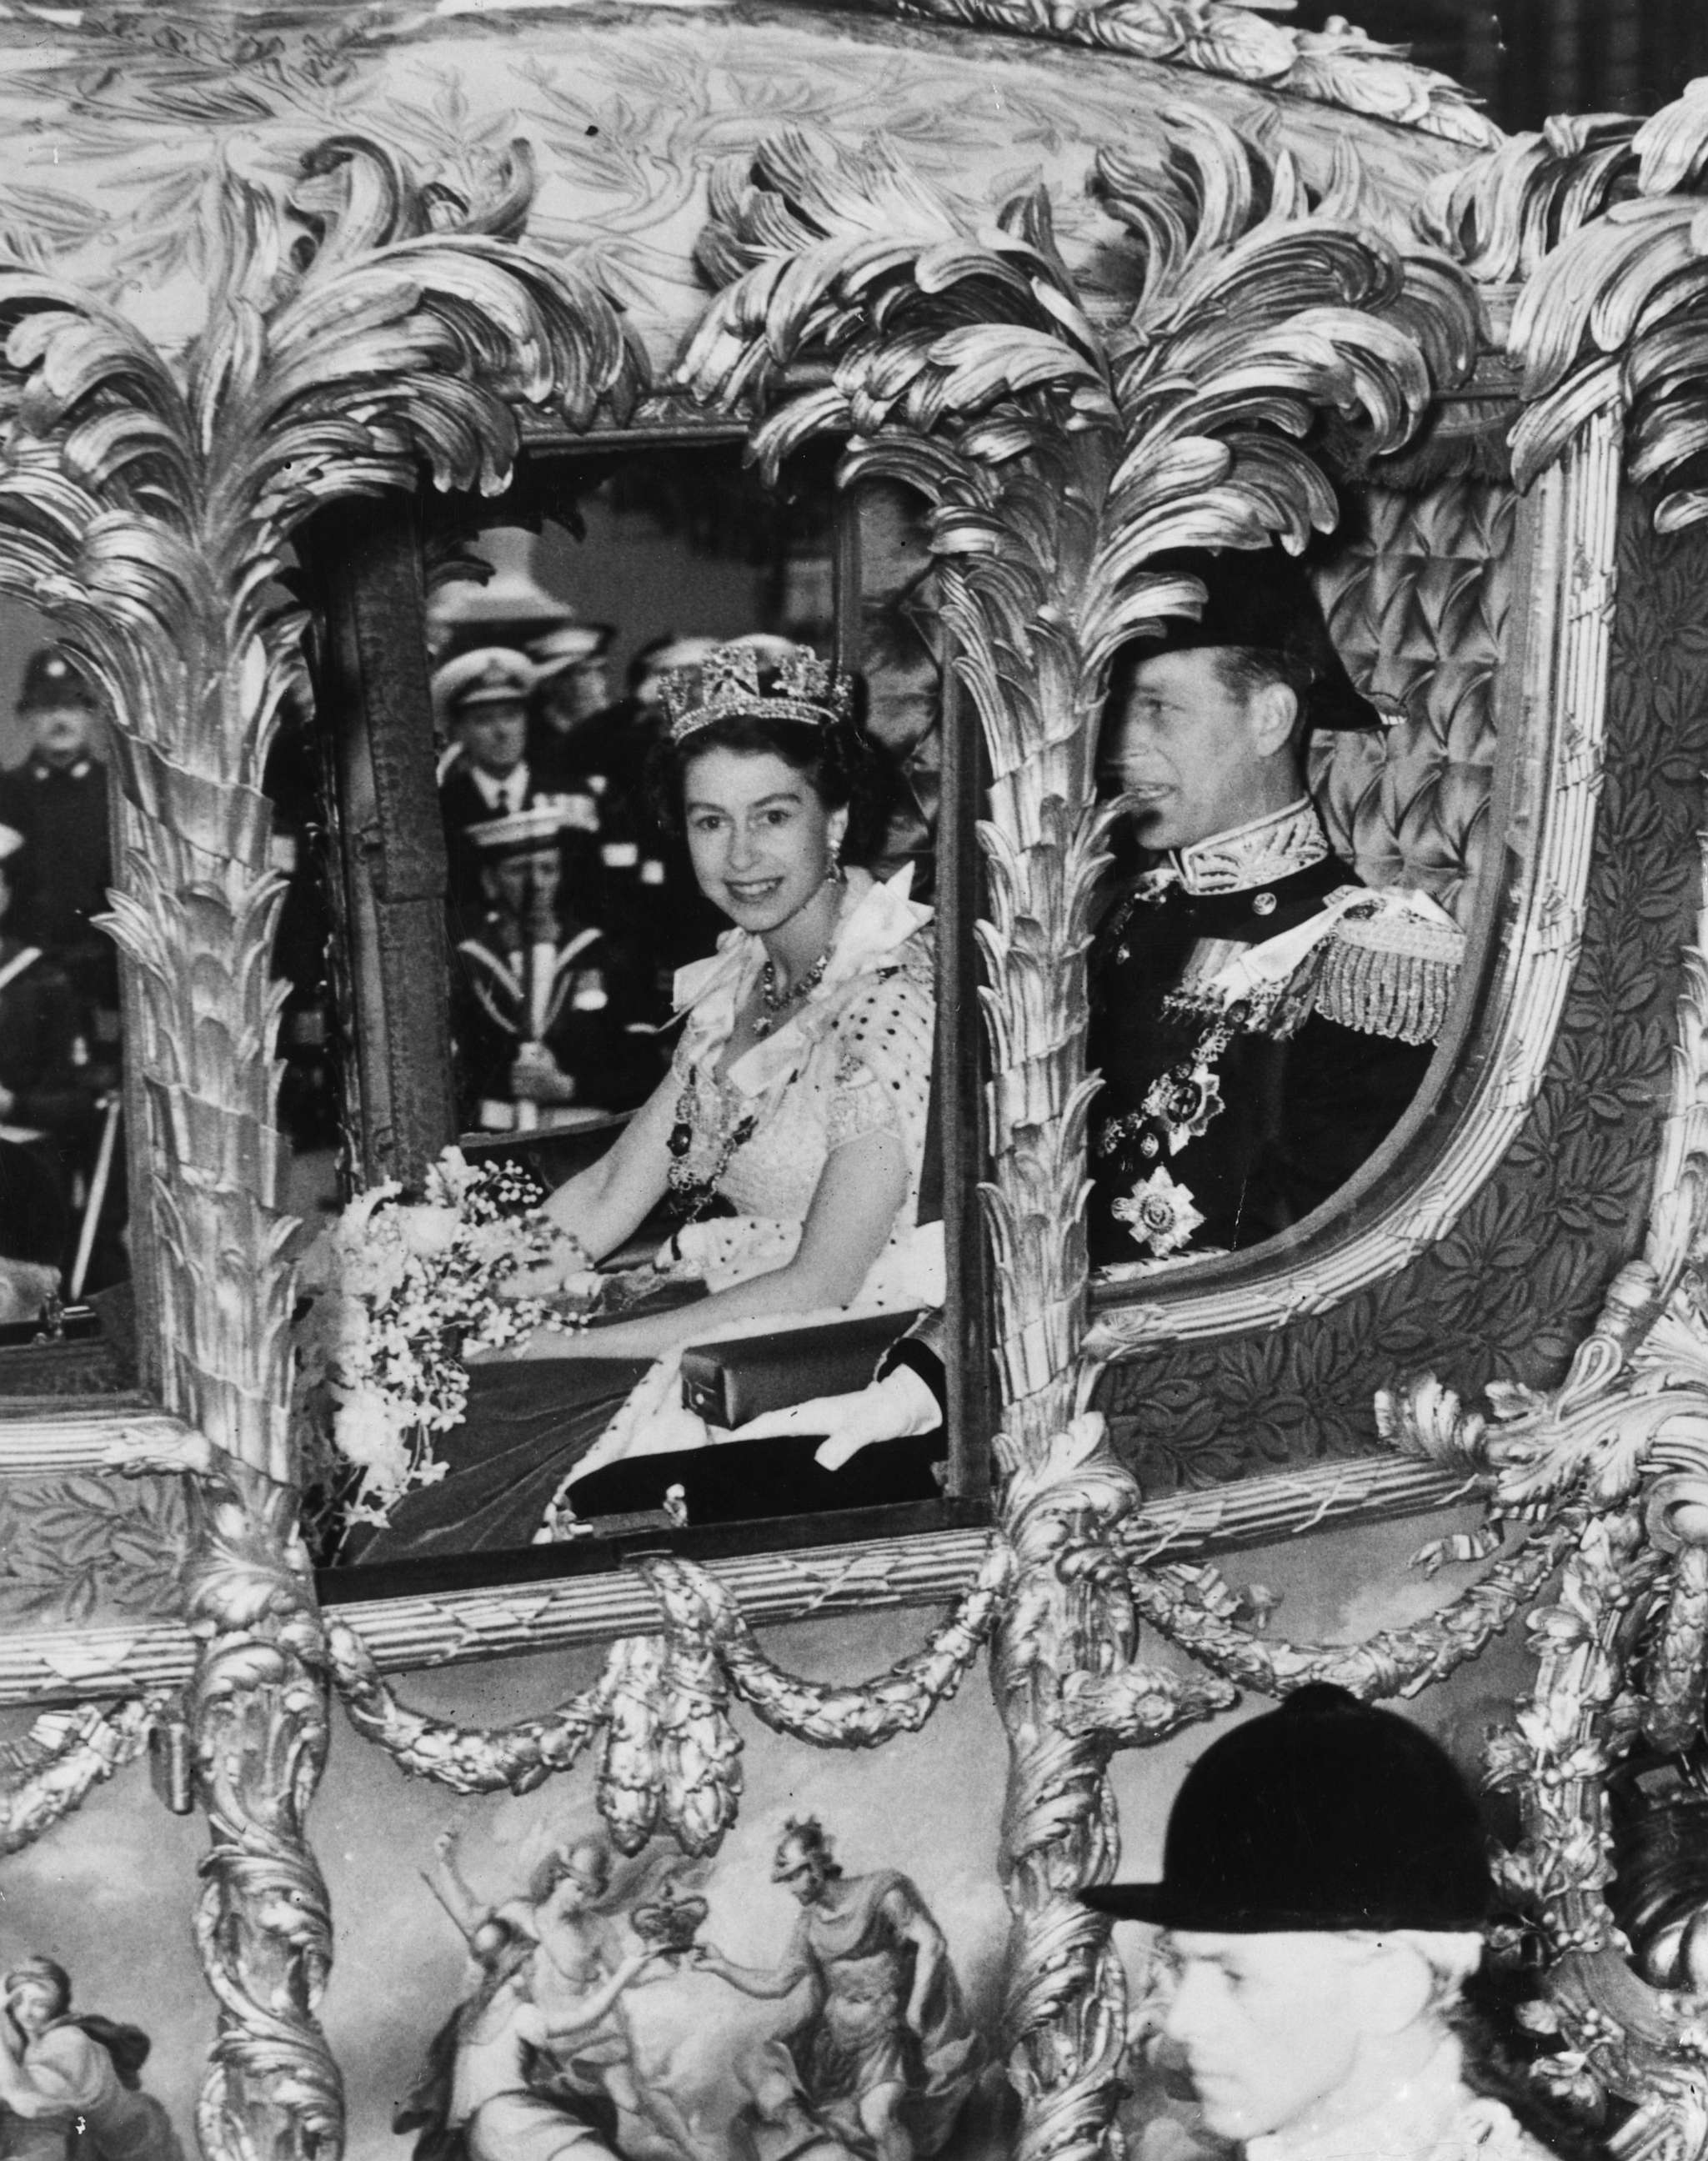 PHOTO: Queen Elizabeth II with Prince Philip, Duke of Edinburgh looks out from her Coronation Coach as she makes her way to Westminster Abbey for Coronation ceremony, June 2, 1953 in London.